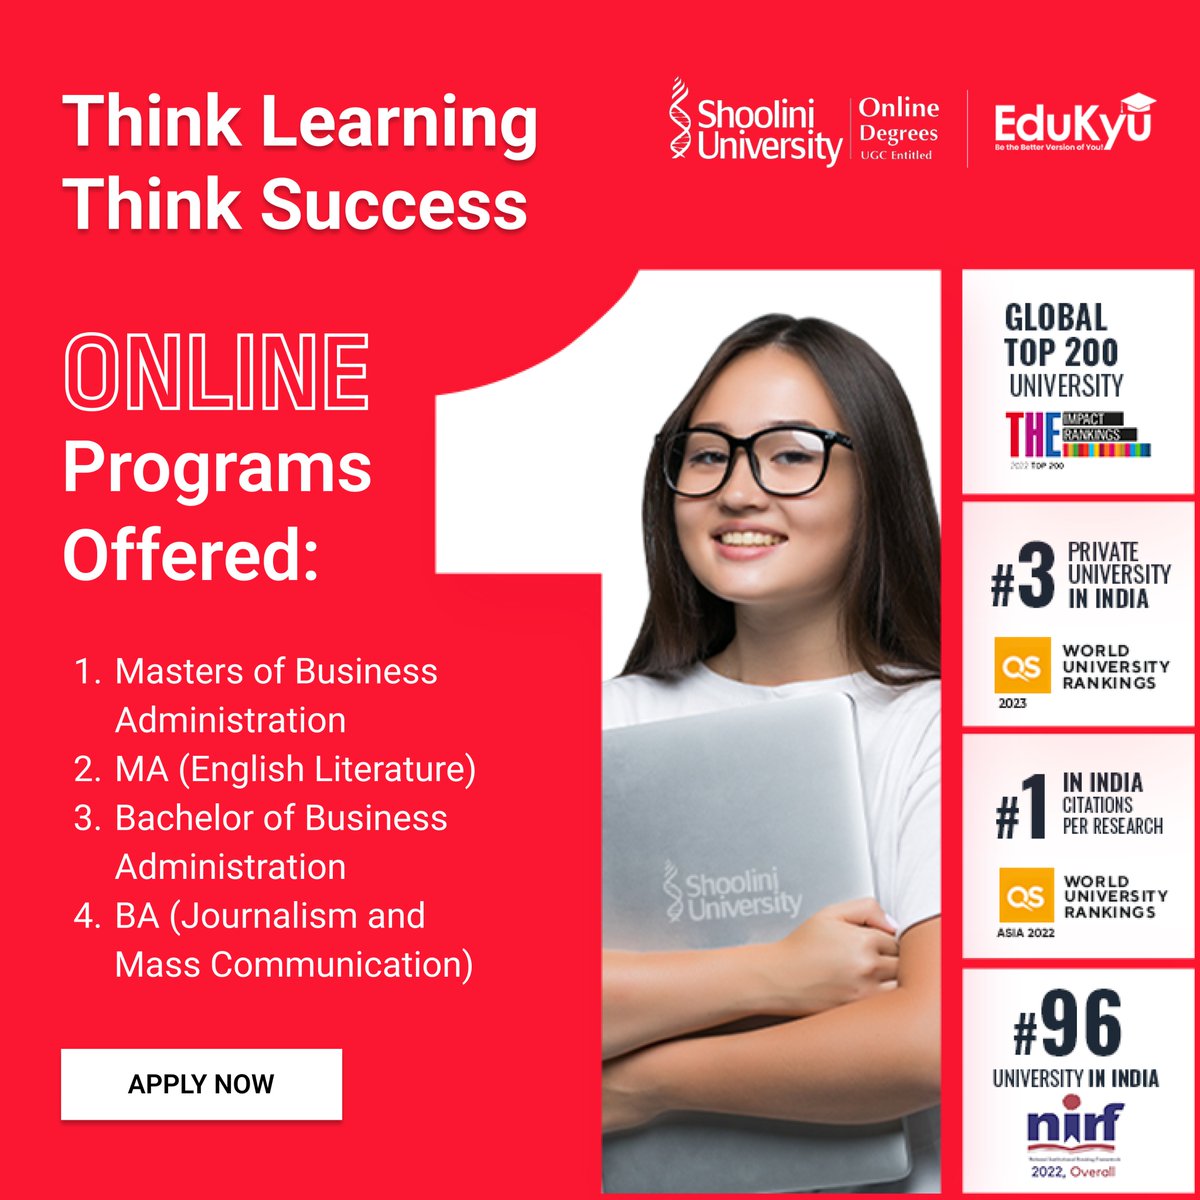 Shoolini University offers accredited online programs designed to empower you with the knowledge & skills you need to excel.

Apply Now!
wa.me/message/TINDX5…

#Edukyu #ShooliniUniversity #Shoolini #OnlineMBA #ThinkLearning #ThinkSuccess #OnlineEducation #Success #MBA